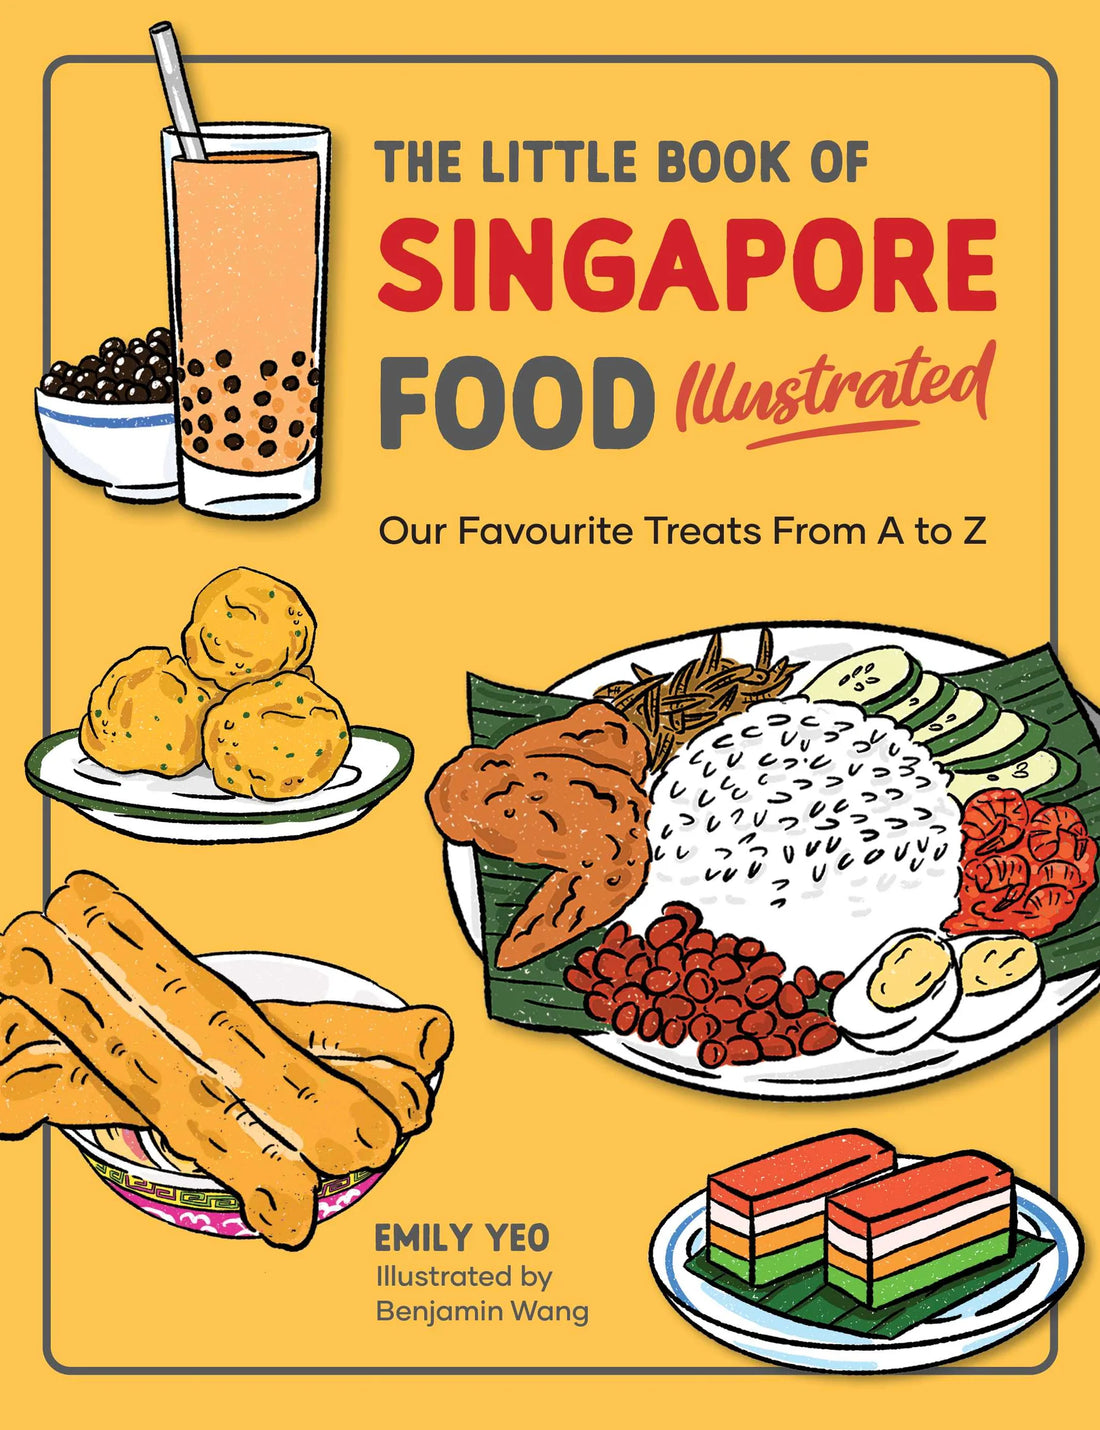 The Little Book of Singapore Food Illustrated: Our Favourite Treats from A to Z